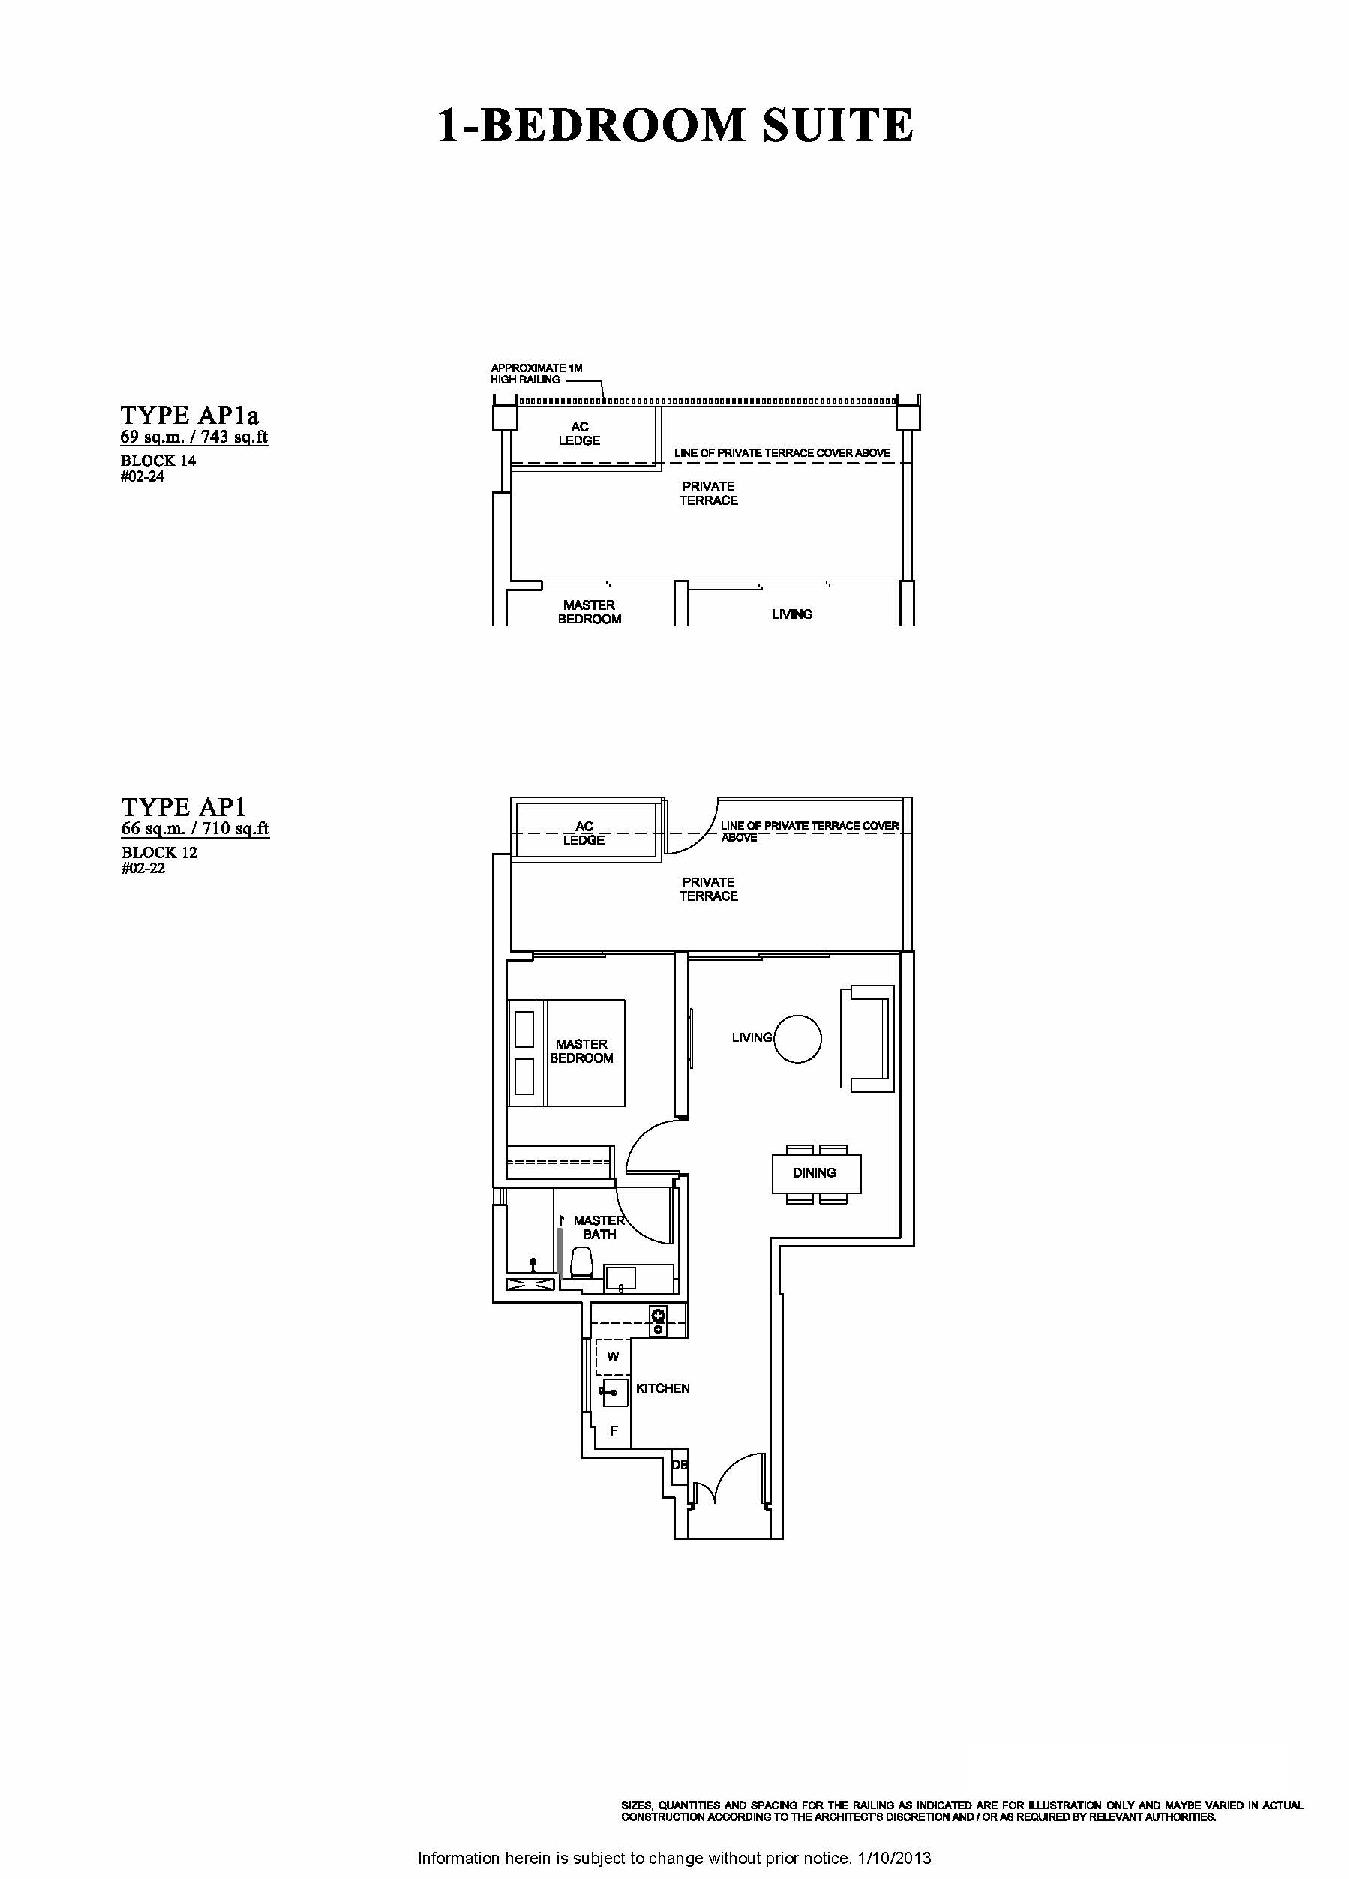 The Venue Residences 1 Bedroom Floor Plan Type AP1 and AP1a